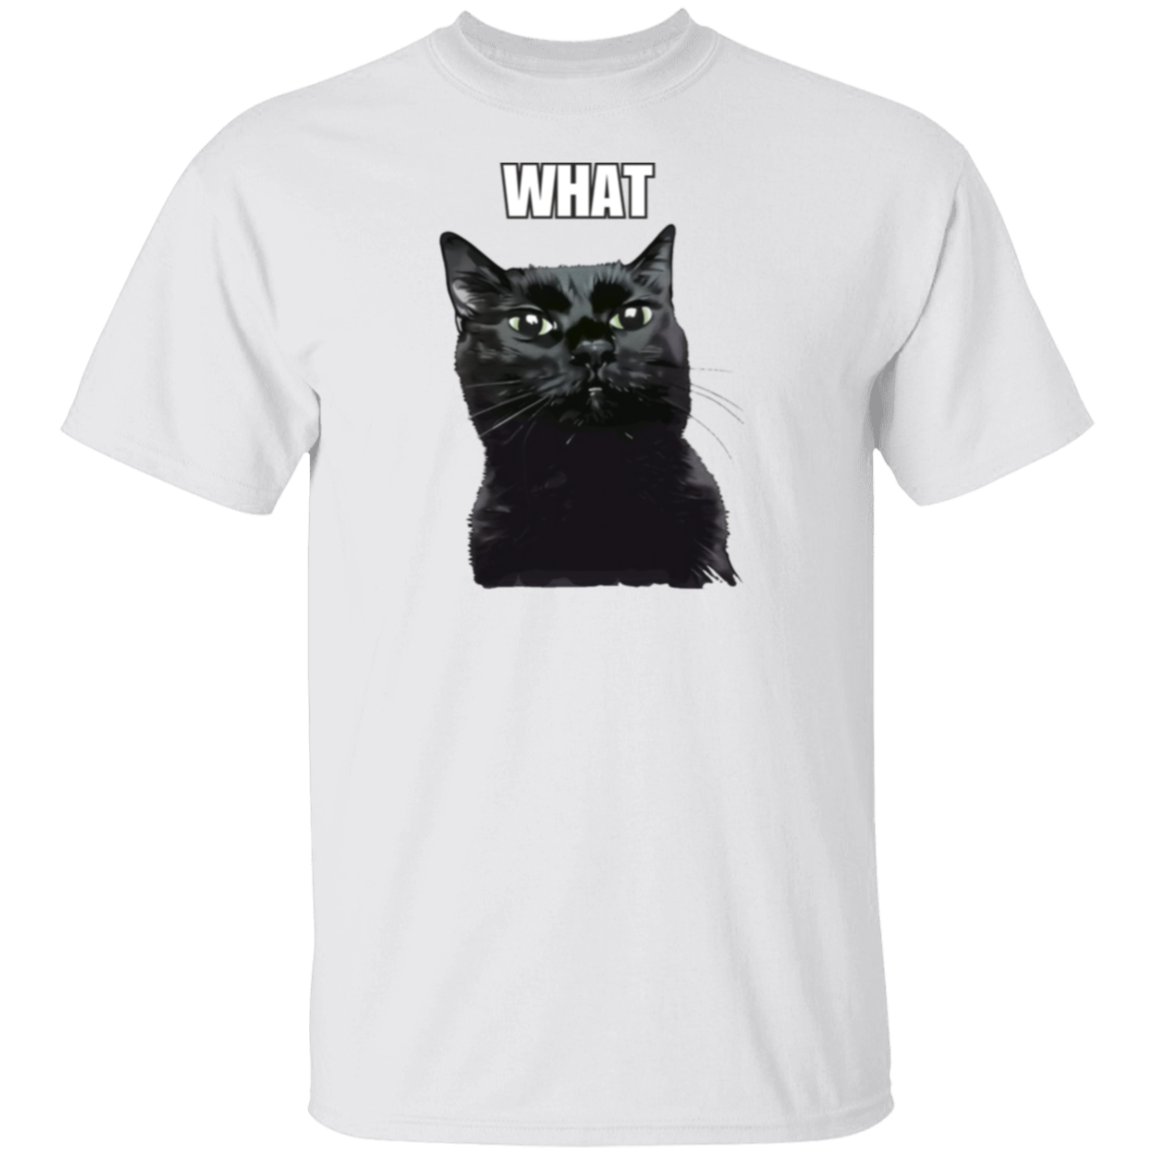 Zoned Out Black Cat T-Shirt